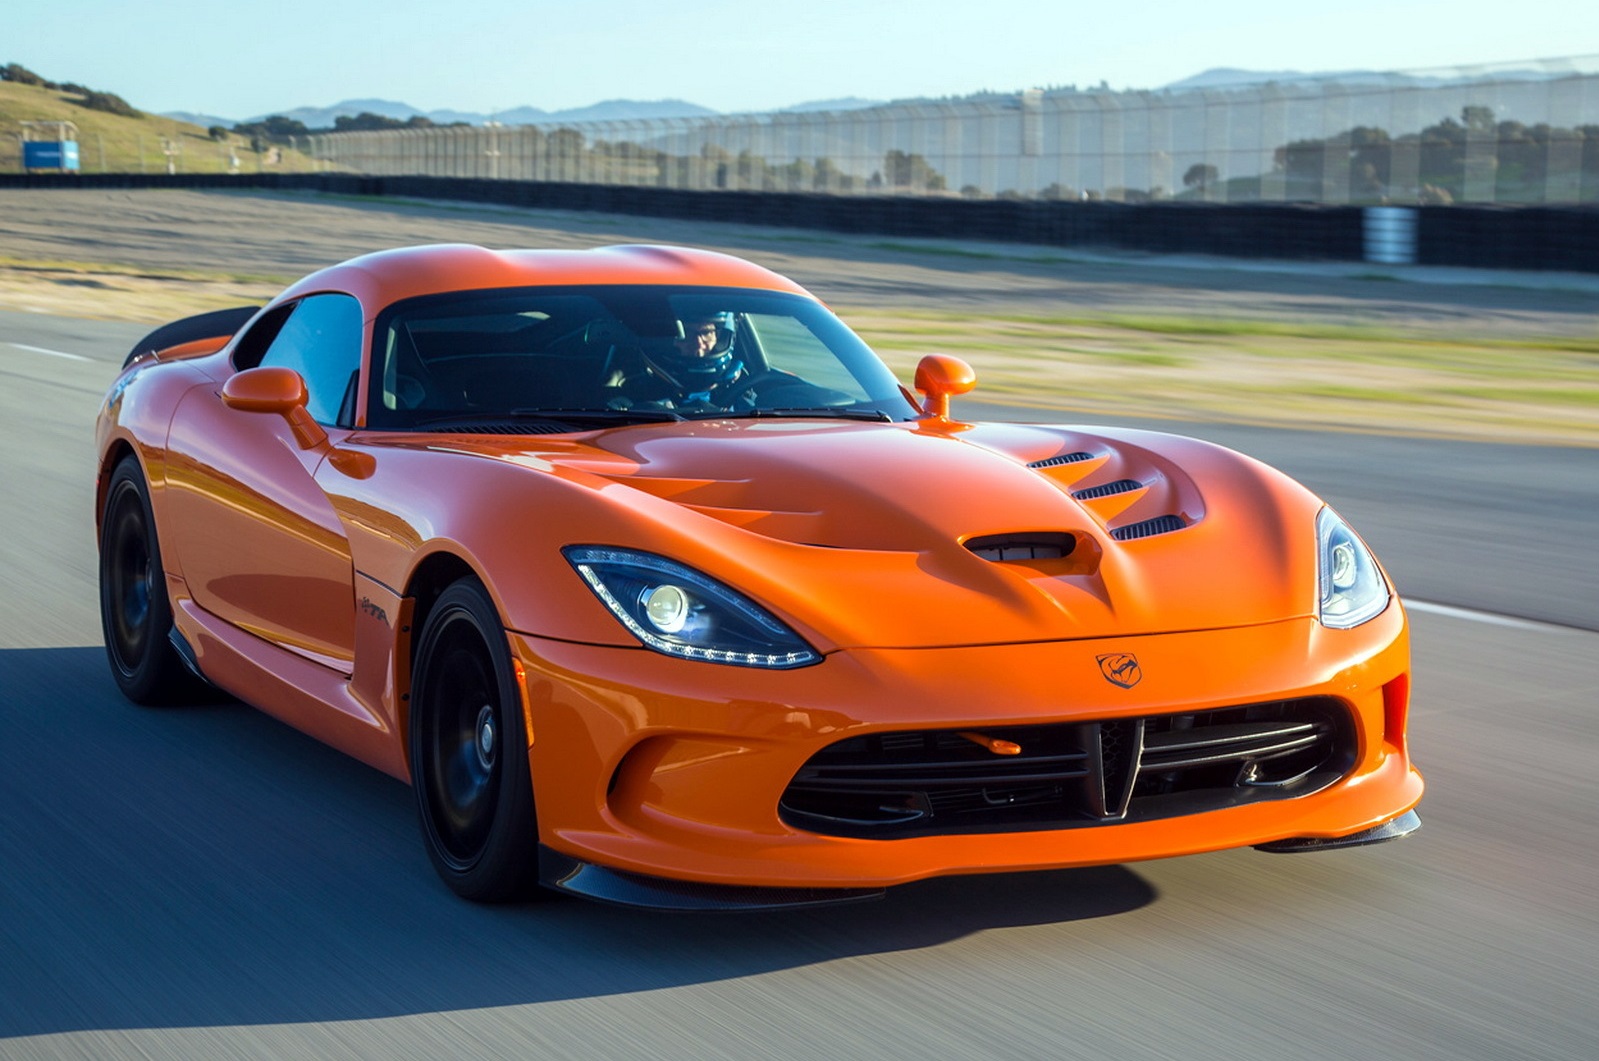 <p>There was nothing subtle about the Dodge Viper, so it’s no surprise its <strong>V10</strong> engine grew from 8.0-liters to 8.4-liters by the time that fourth-generation version arrived. This development of the V10 used variable valve timing, which was a first for a <strong>pushrod</strong> engine. It helped to free up <strong>600 hp</strong> and 560 lb-ft of torque. By the time the final VX model arrived in 2015, the Viper boasted <strong>654 hp</strong>.</p><p>An even more powerful version of the 8.4-liter unit was used in GT3 racing, producing <strong>689 hp</strong>, though this was pegged back to nearer 600 hp in come series. The engine proved very <strong>reliable</strong> as was under-stressed even in race tune and helped the Viper win several races and championships.</p>